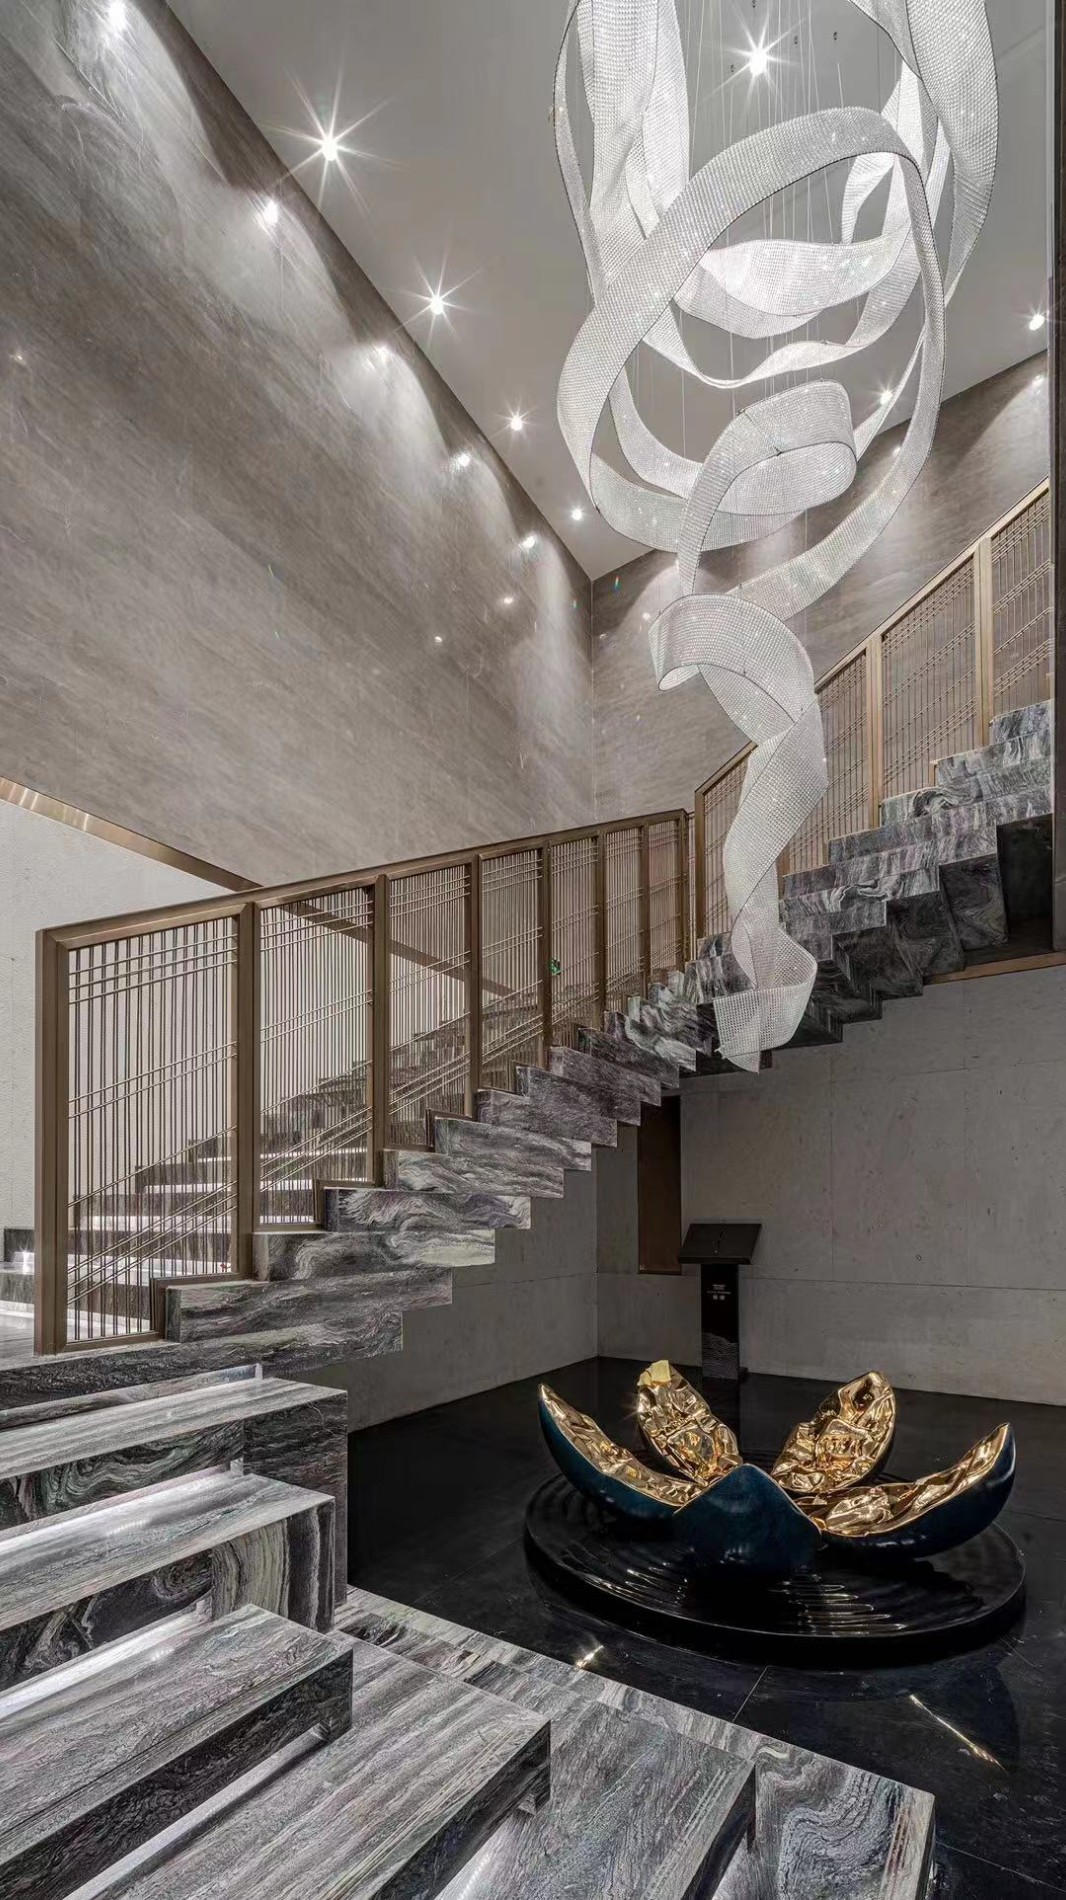 Spiral Stairs Lighting Fixtures Modern Design crystal blanket chandeliers for hotel project